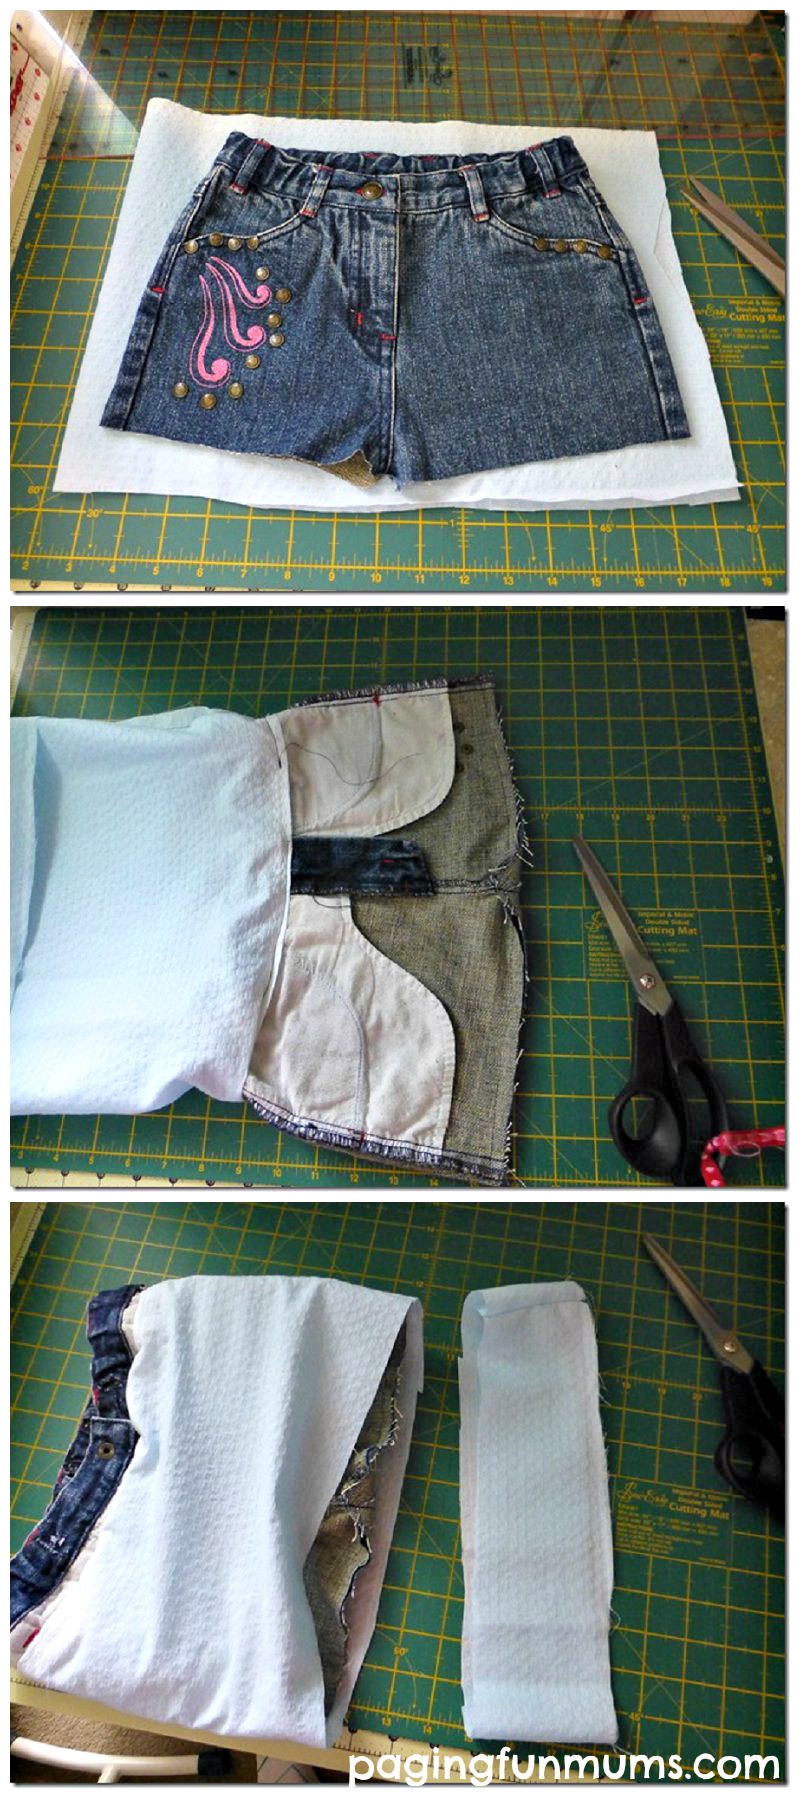 How to Make a Handbag Using a Pair of Jeans - Paging Fun Mums